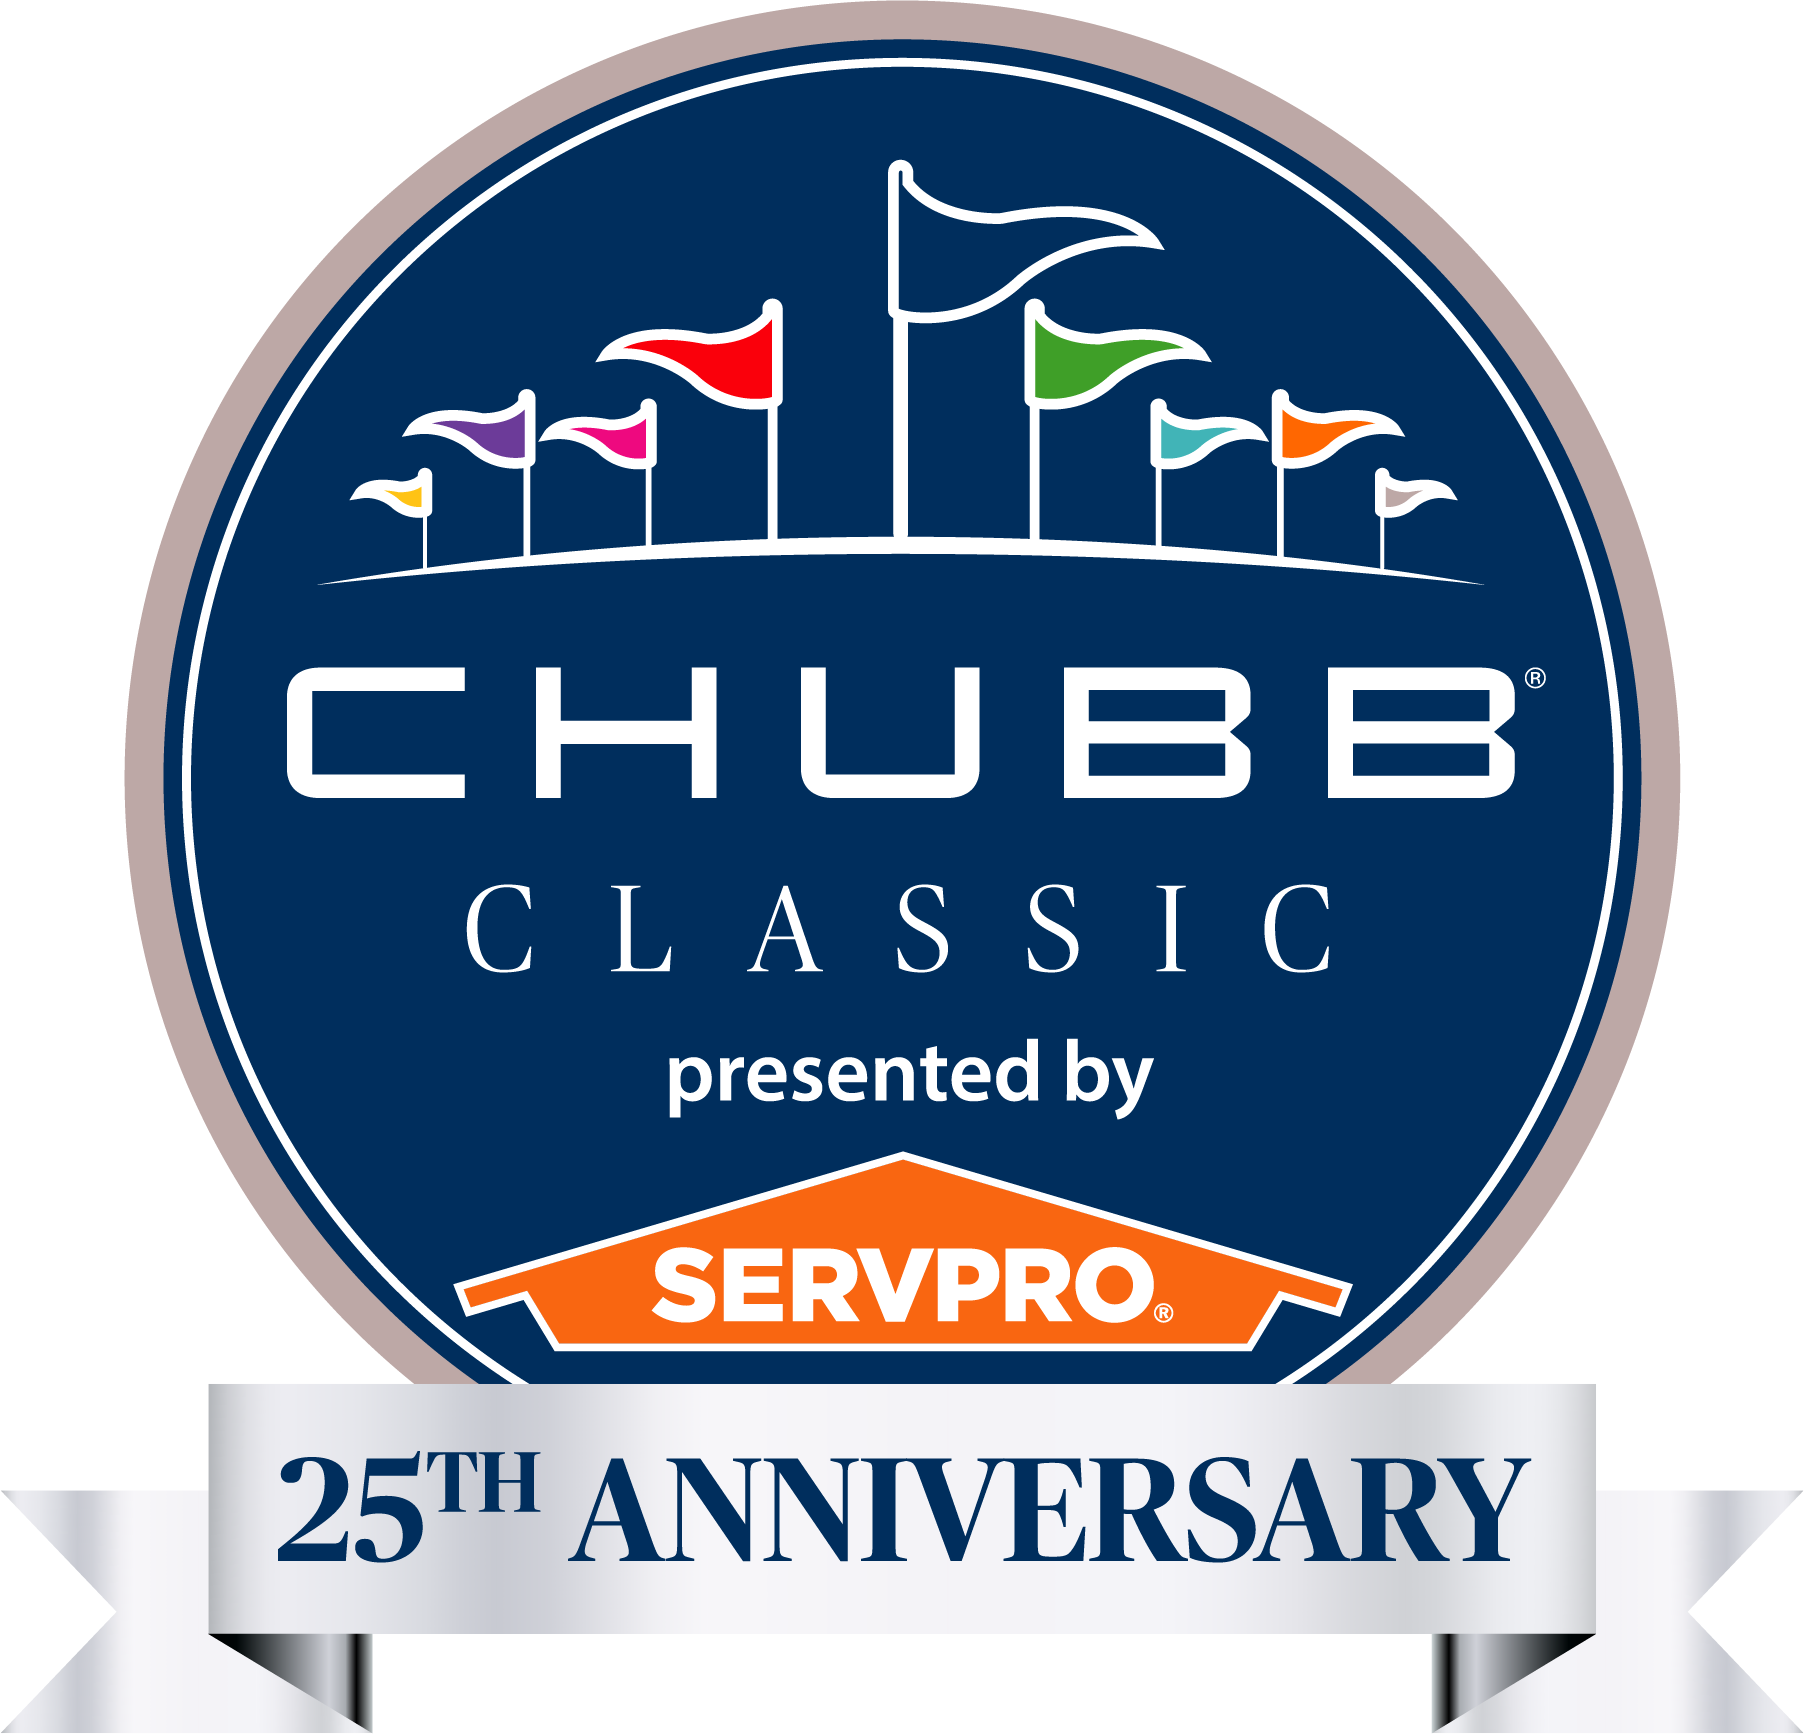  Chubb to Celebrate 25th Anniversary as Title Sponsor of the Chubb Classic presented by SERVPRO 